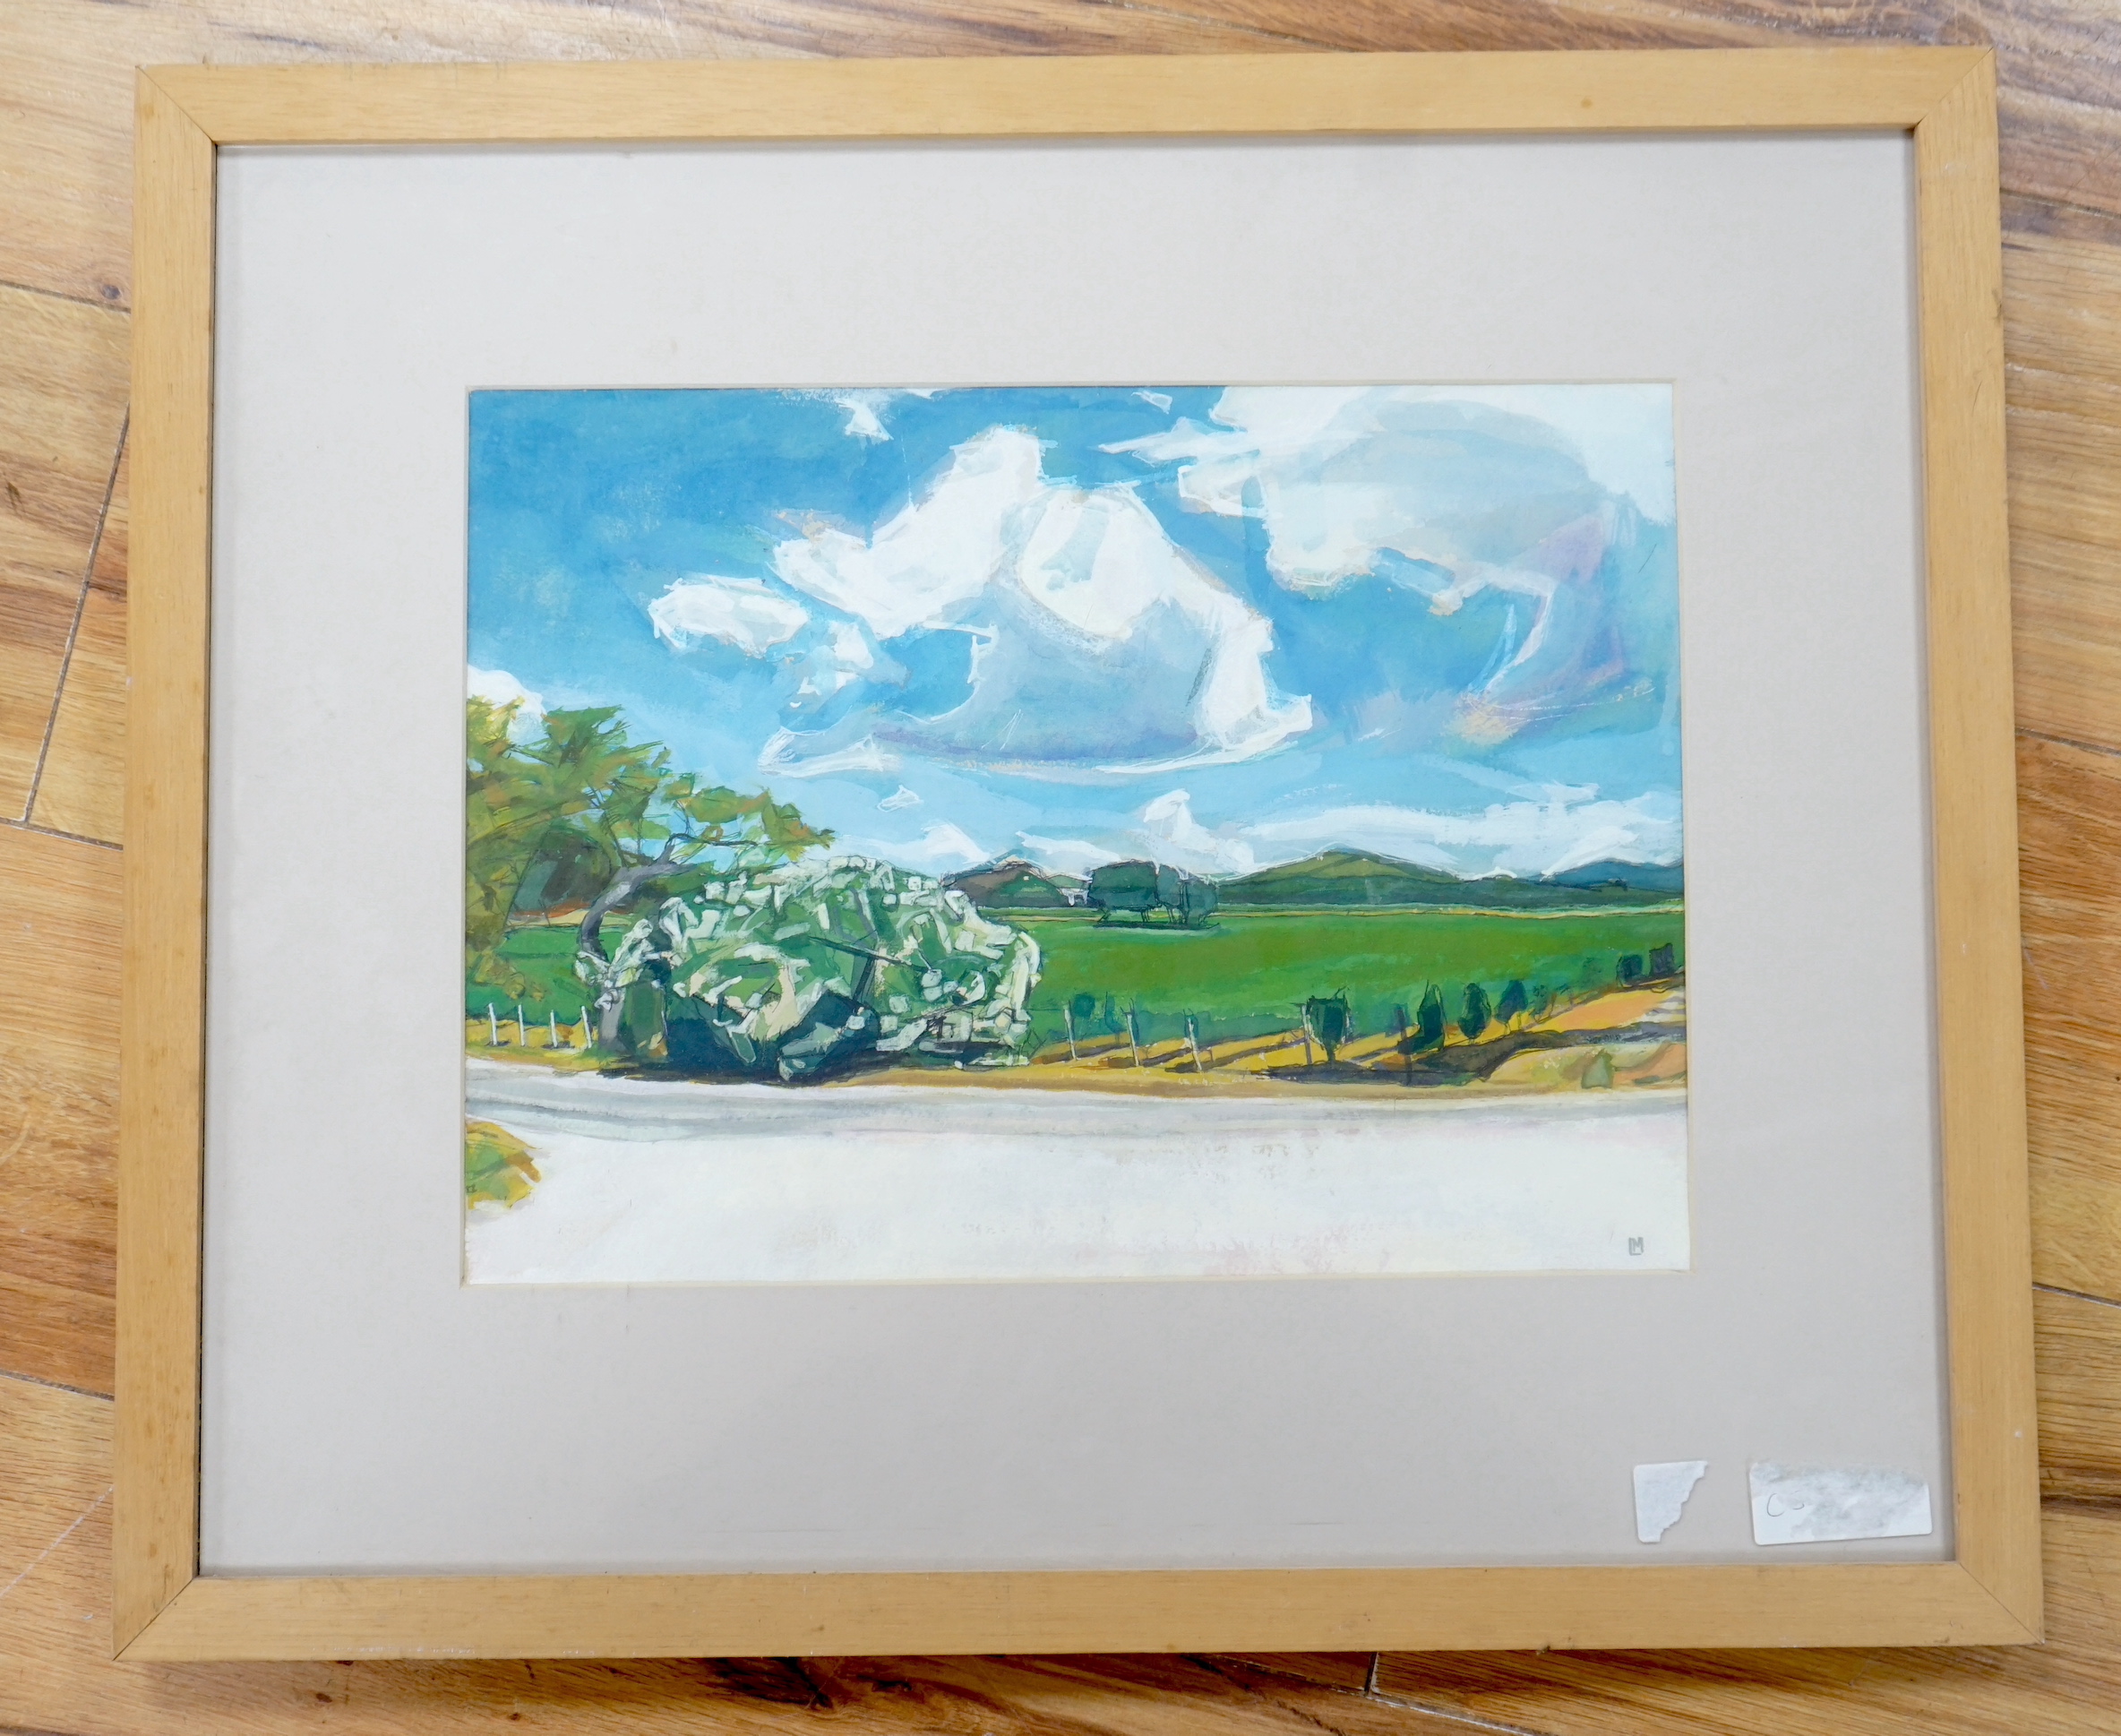 Lisa Micklewright, watercolour, 'View near Bregacon', monogrammed, 26 x 35cm - Image 3 of 5